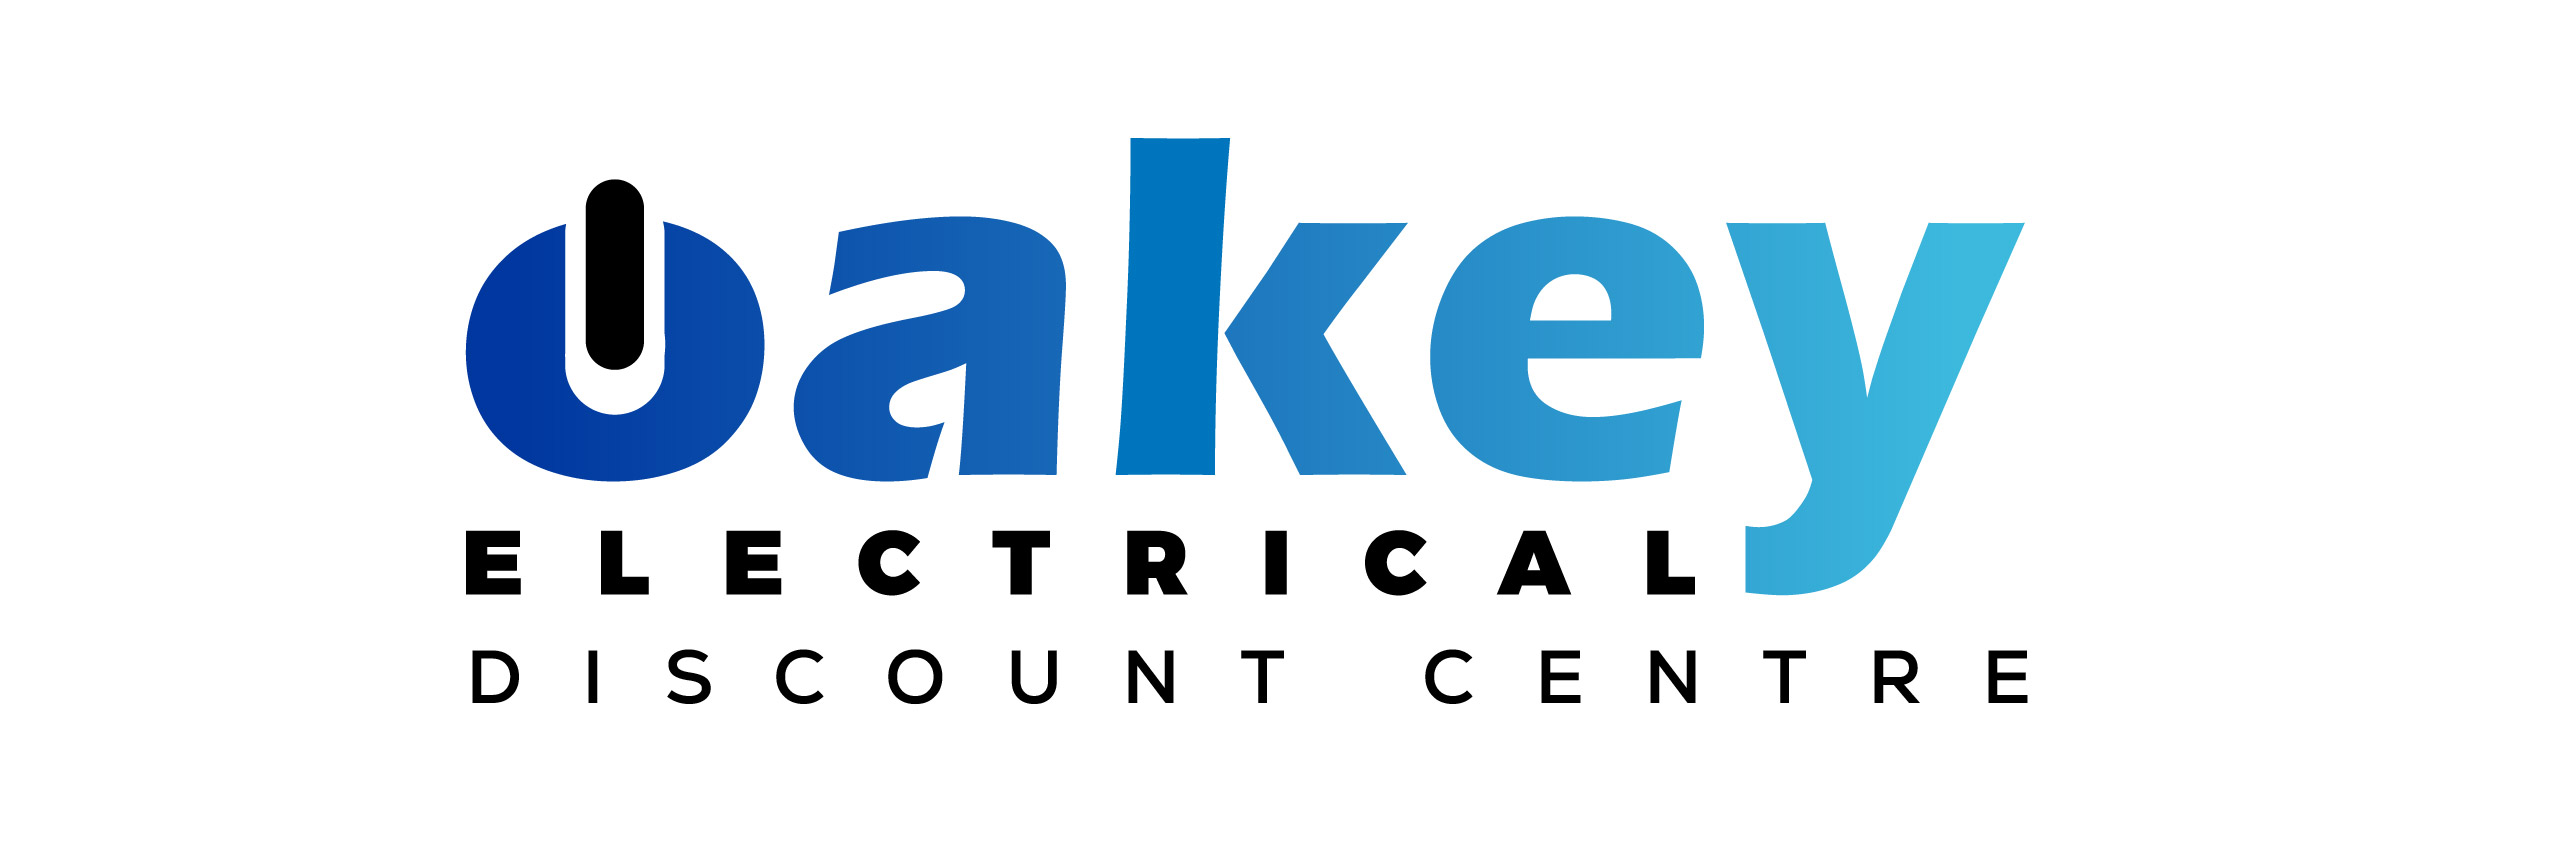 Oakey Electrical Discount Centre